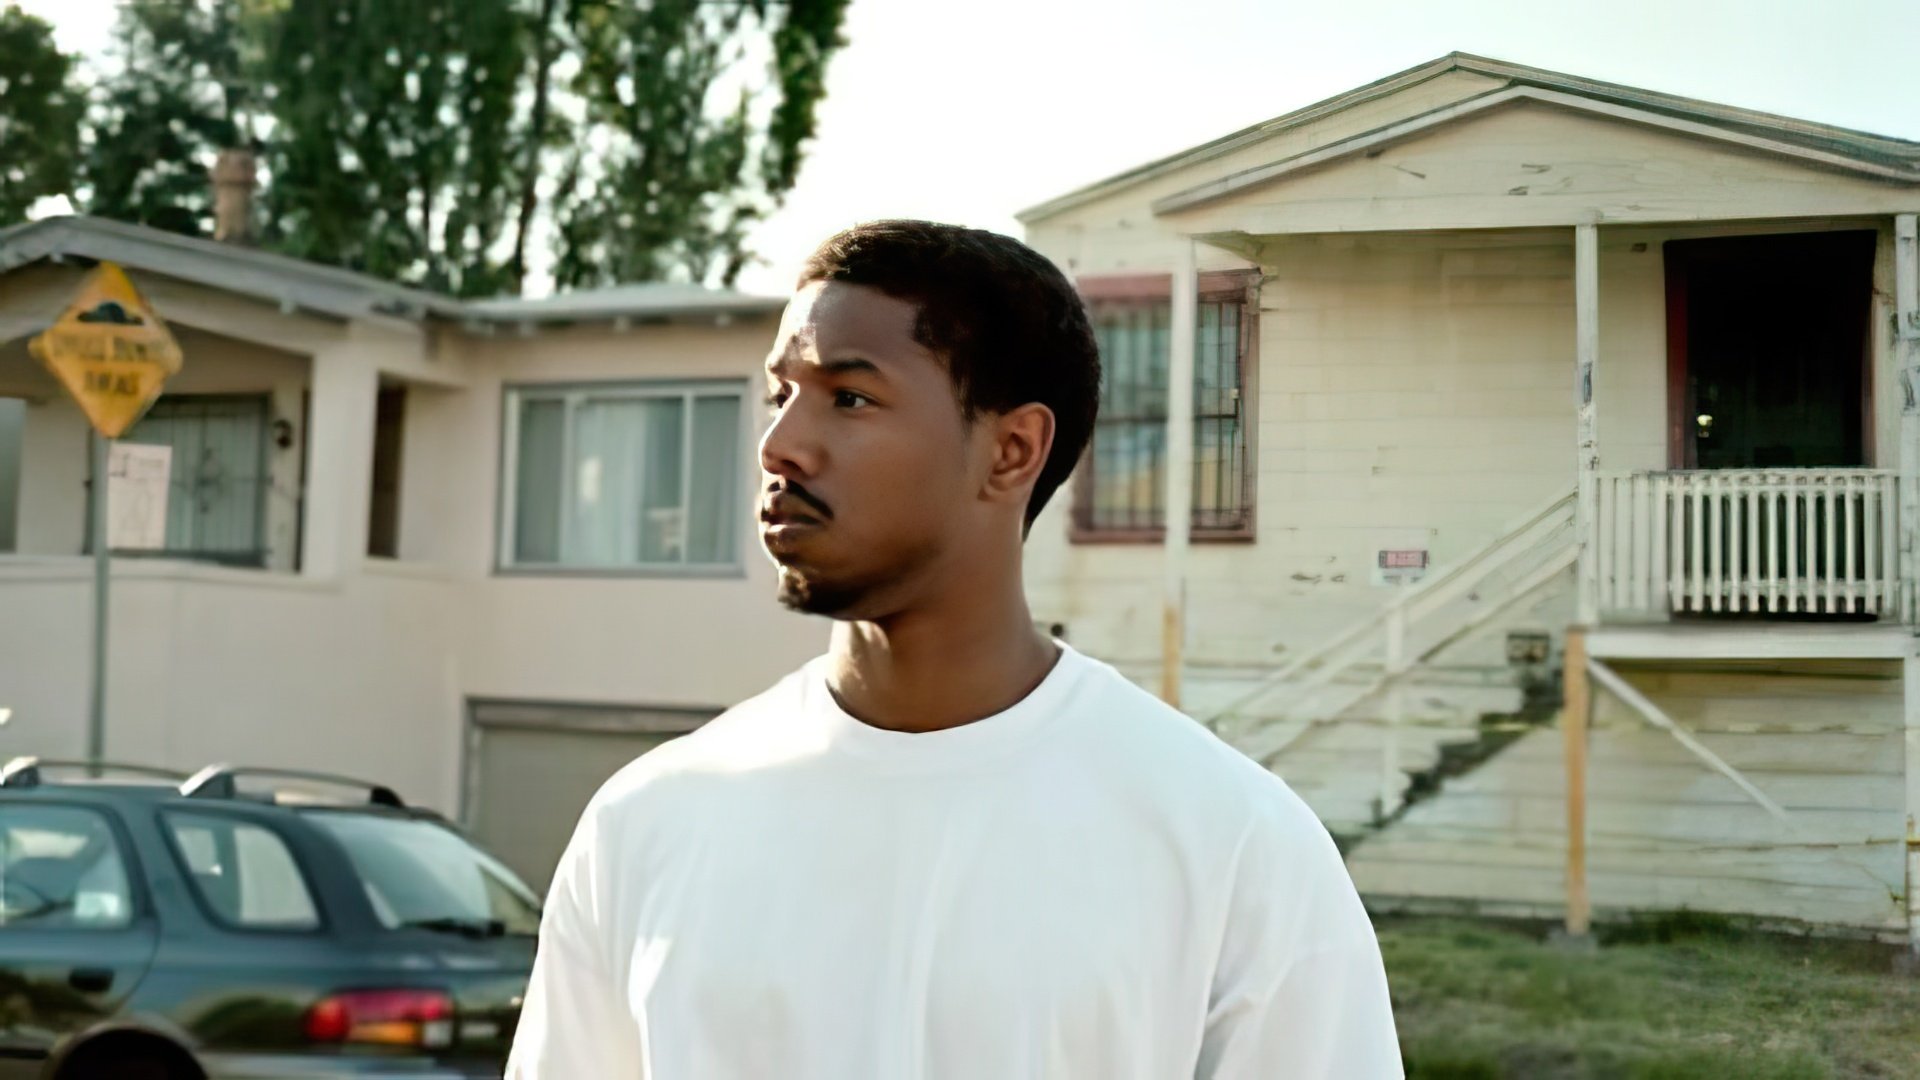 The scene from the movie Fruitvale Station